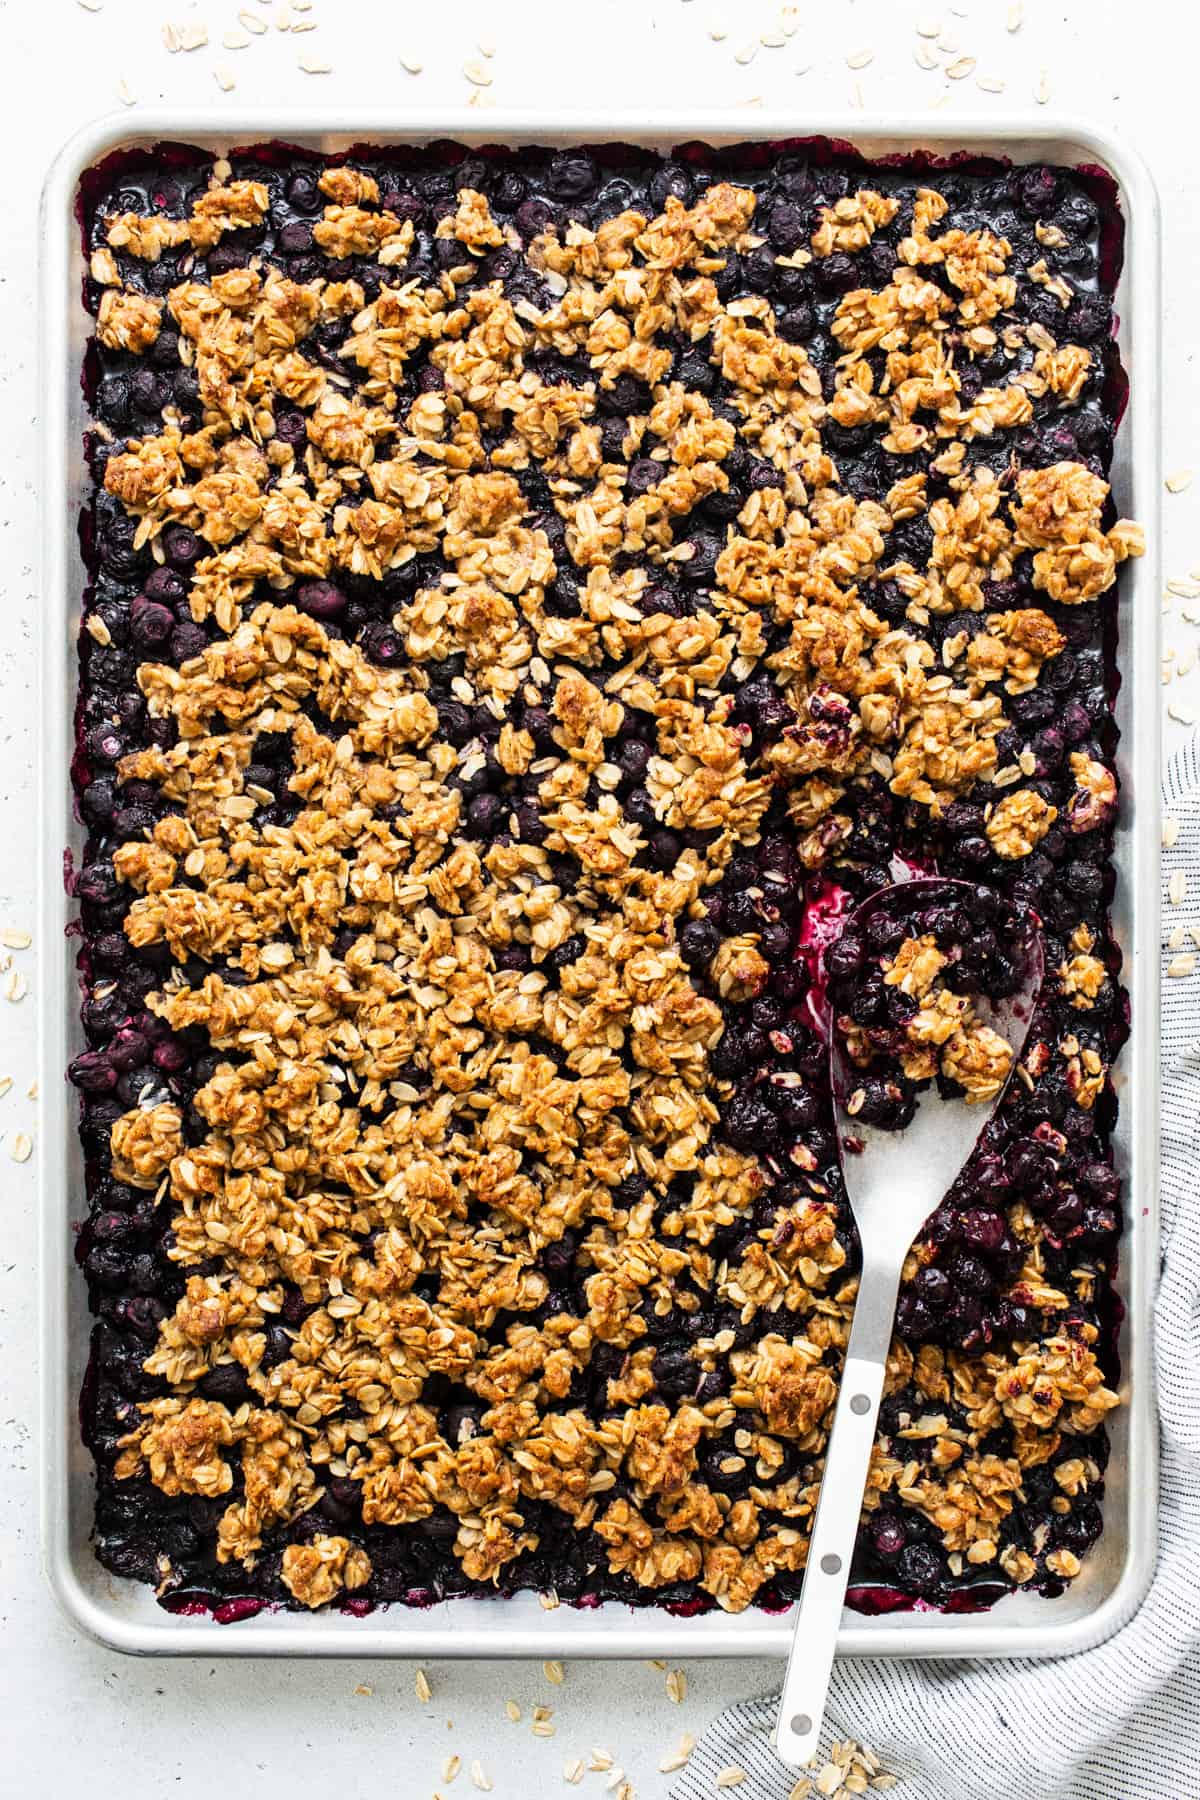 A baked blueberry oatmeal crumble in a rectangular pan with a serving spoon.